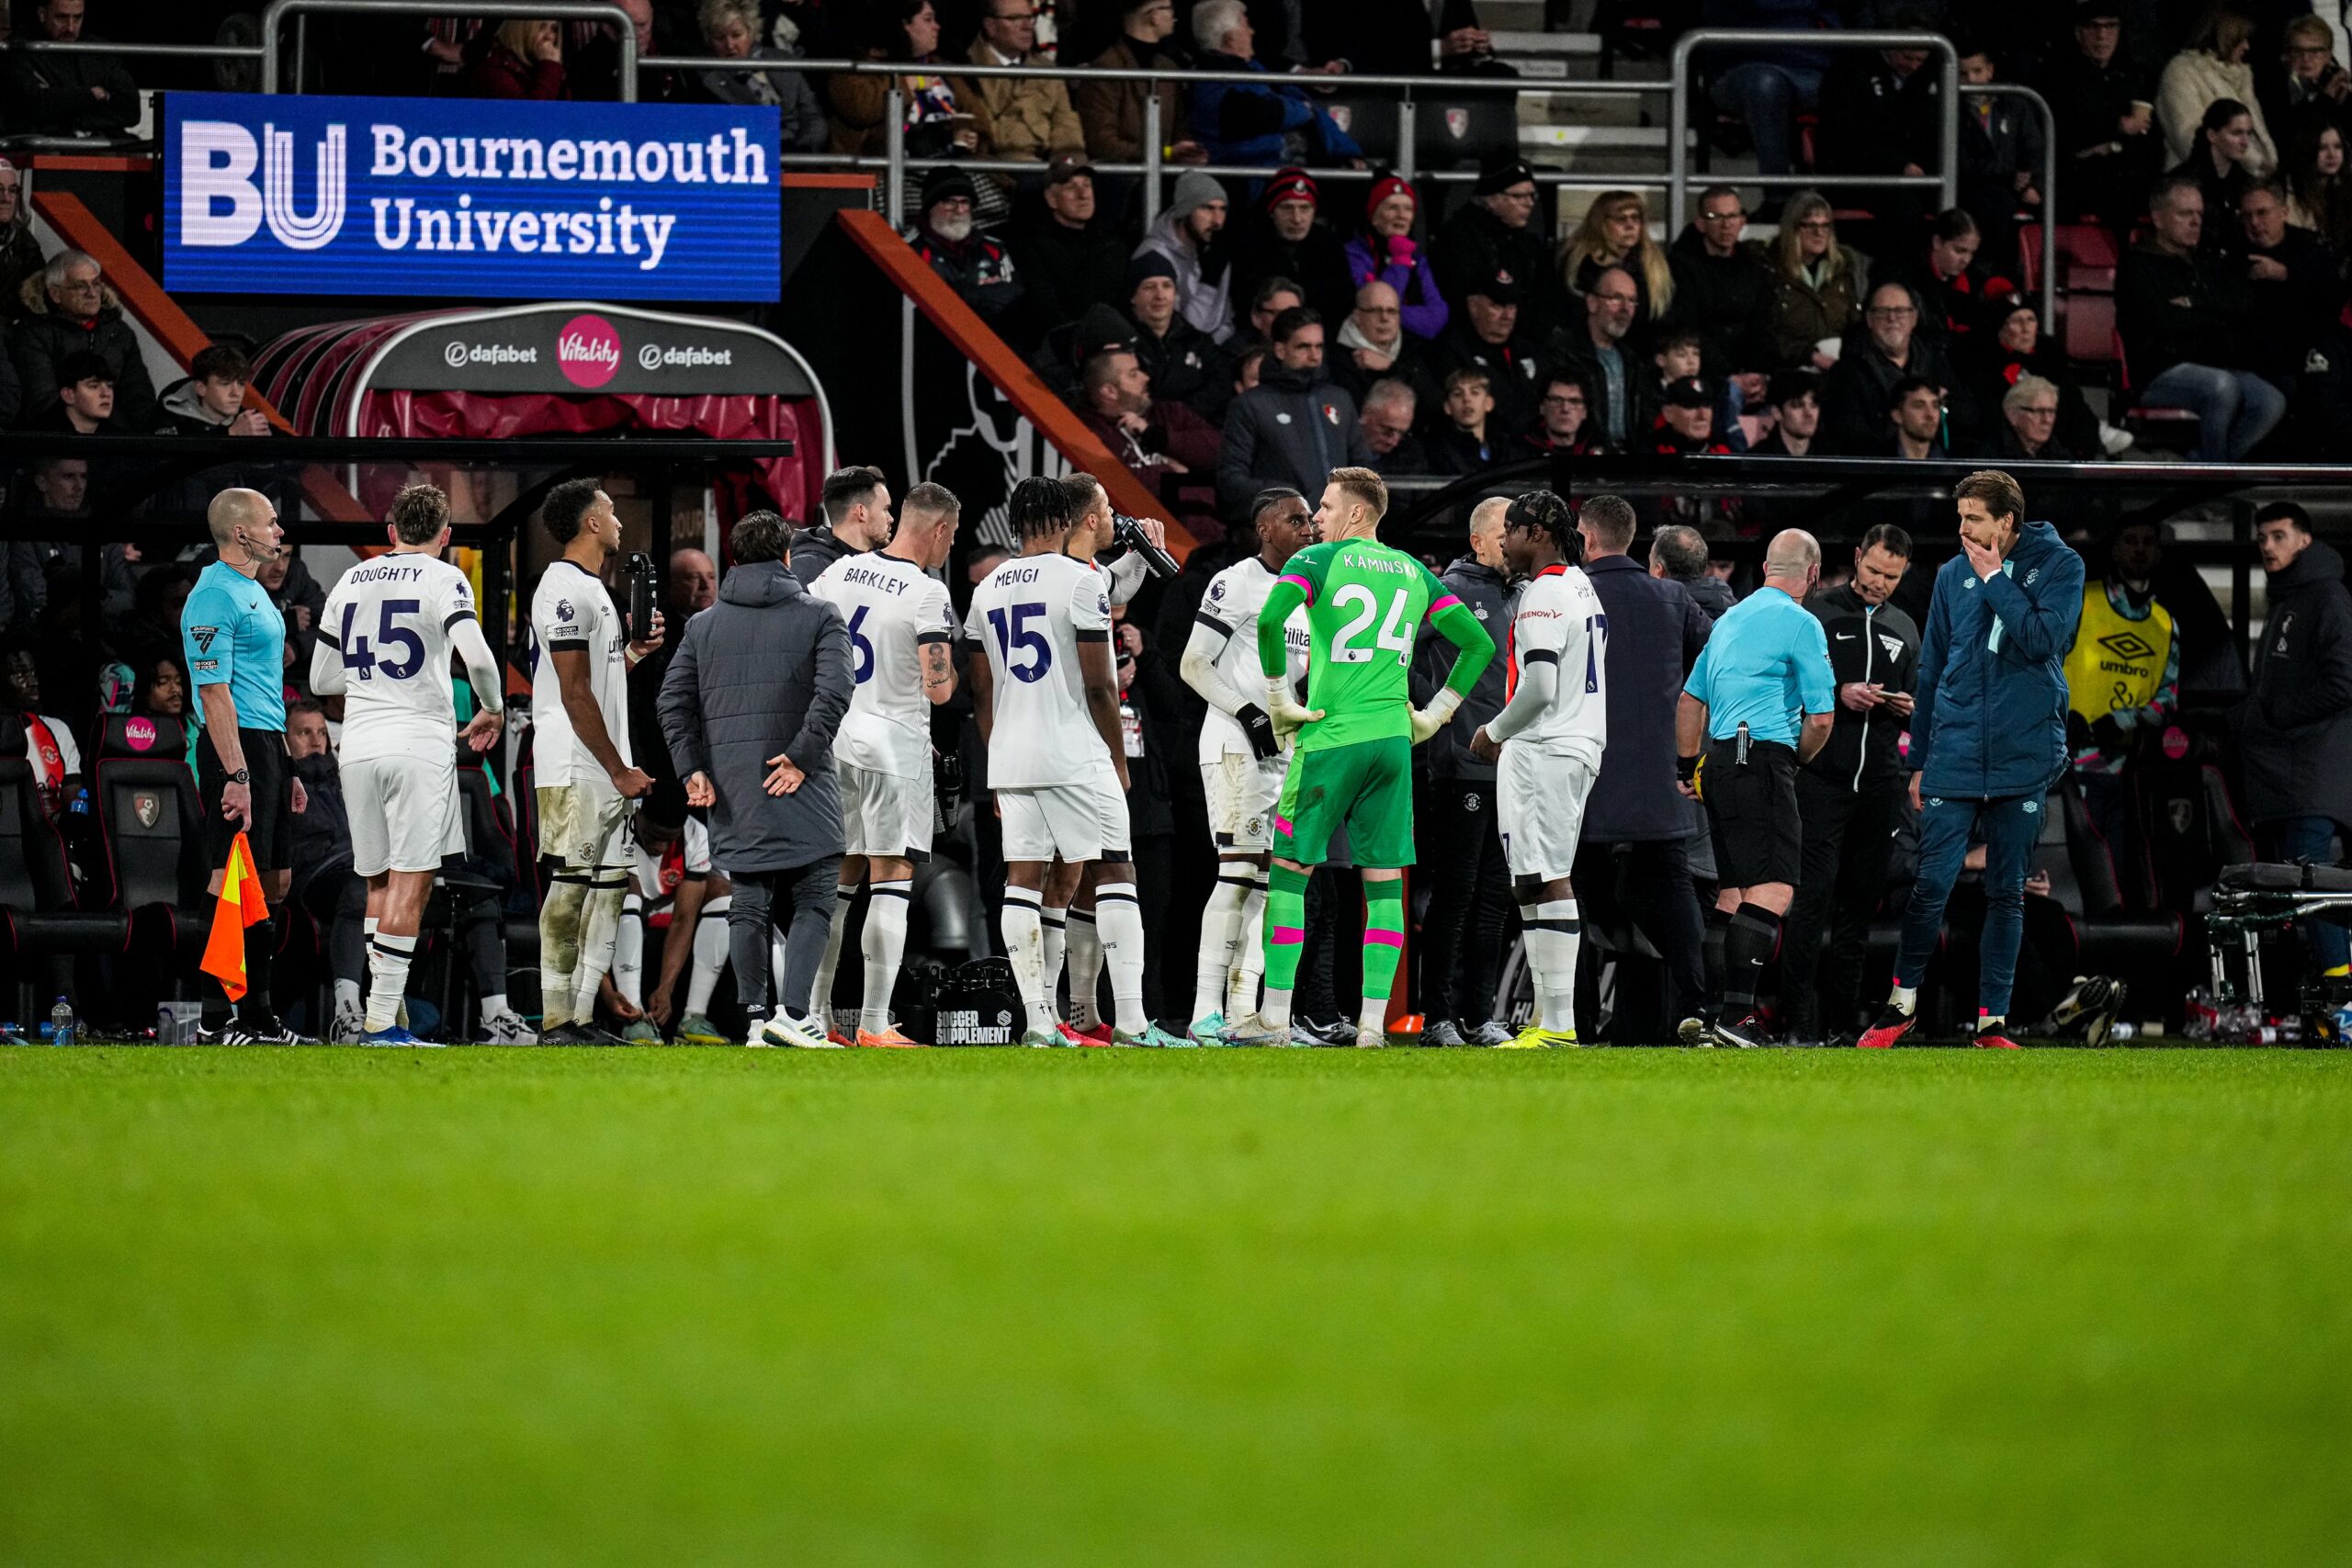 Drama in the Premier League, the Luton captain collapses during the match: he had already suffered an illness on the pitch in May